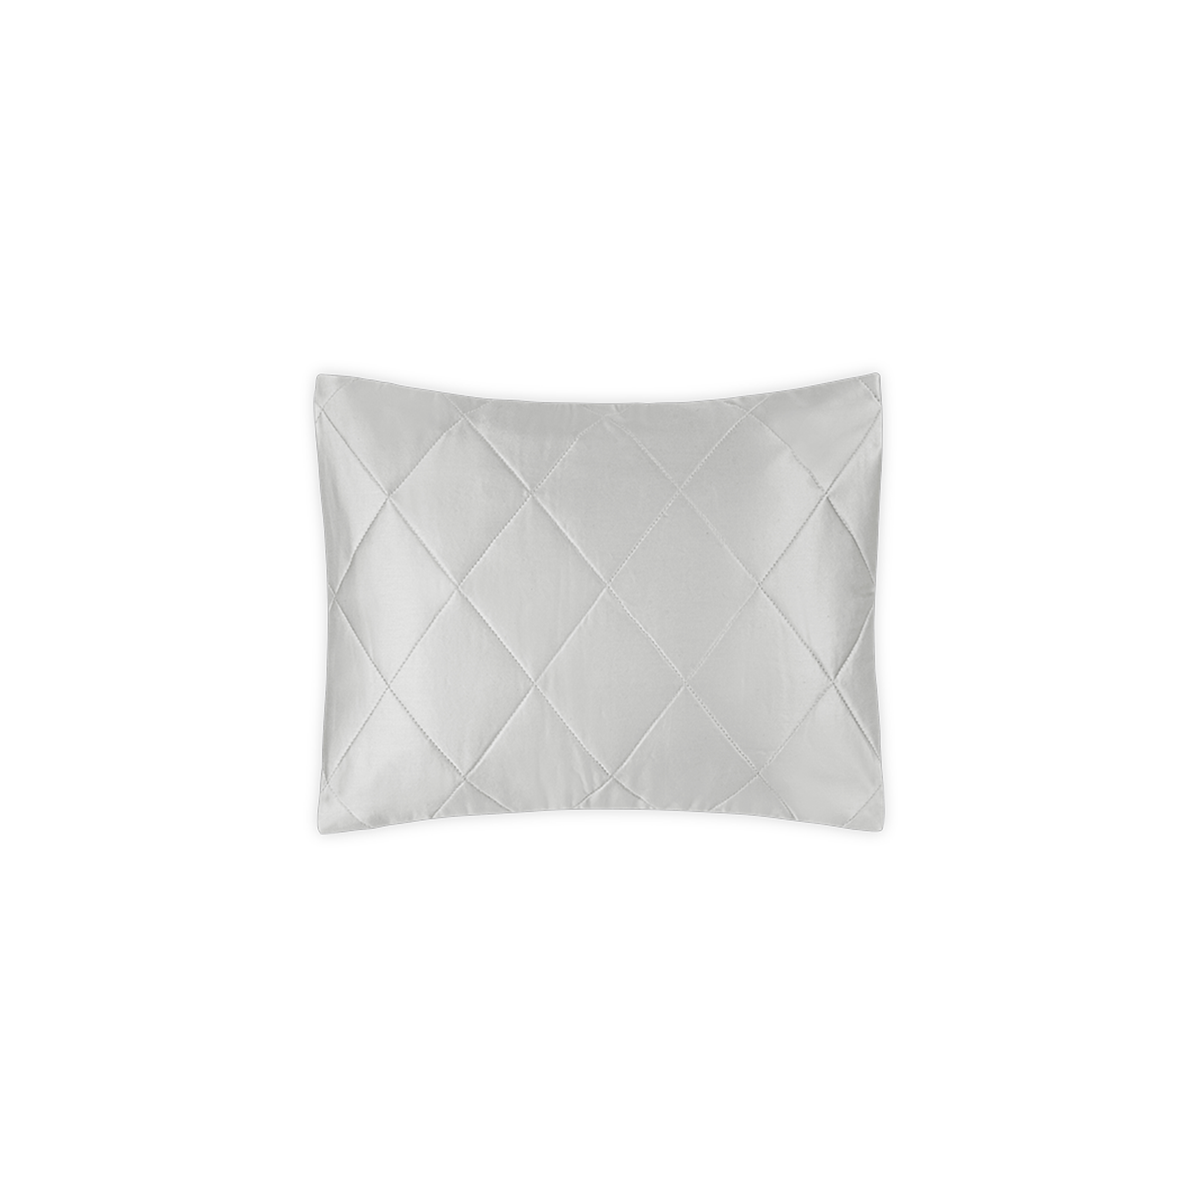 Silo Image of Matouk Nocturne Quilted Bedding Boudoir Sham in Silver